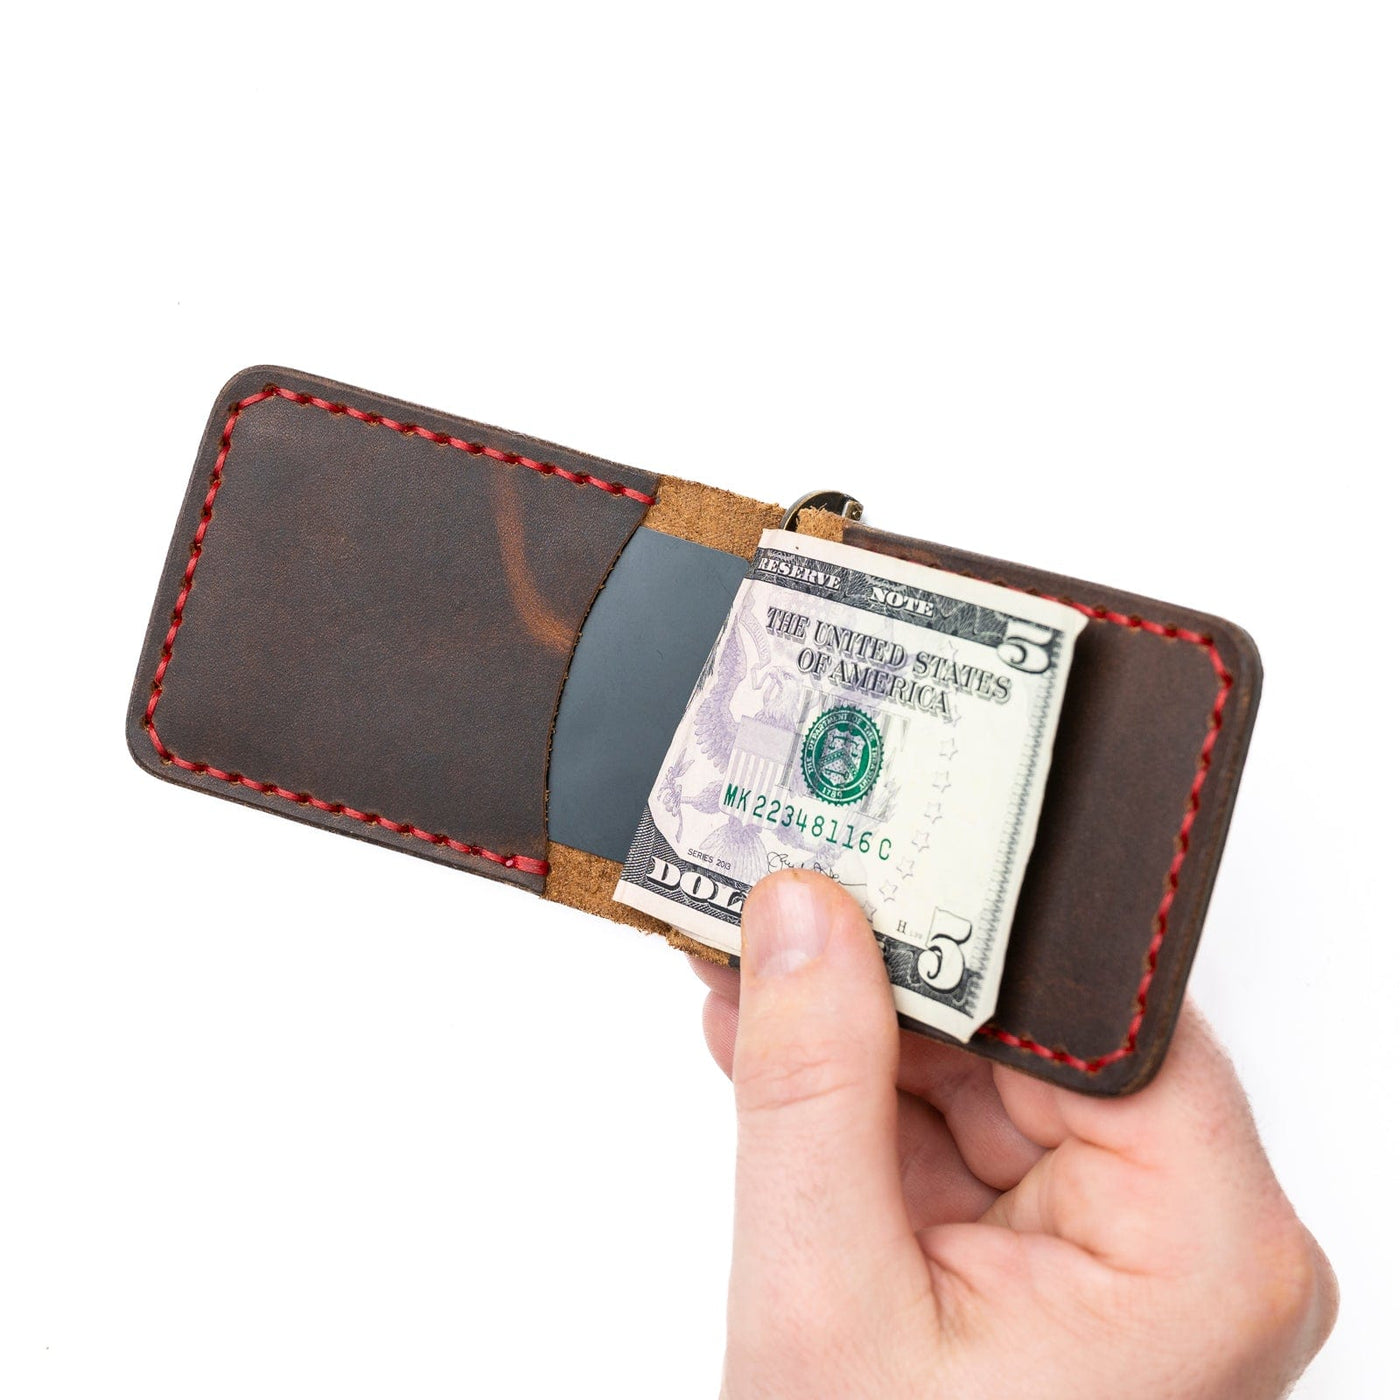 Heritage Brown Money Clip Wallet: For Your Modern Essentials - Popov  Leather®